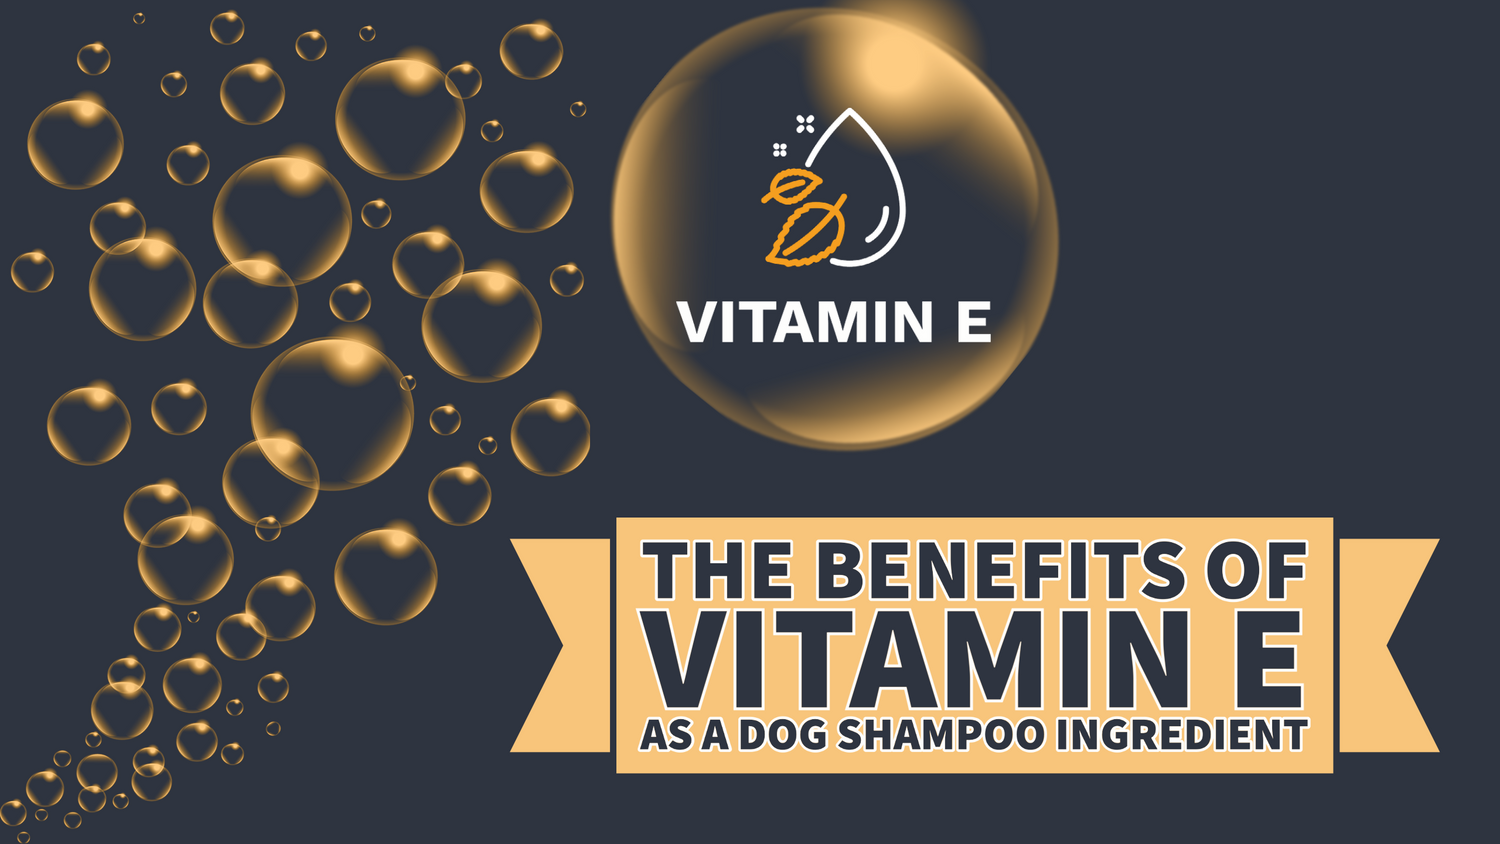 Shampoo bubbles against a dark background and the text THE BENEFITS OF VITAMIN E AS A DOG SHAMPOO INGREDIENT